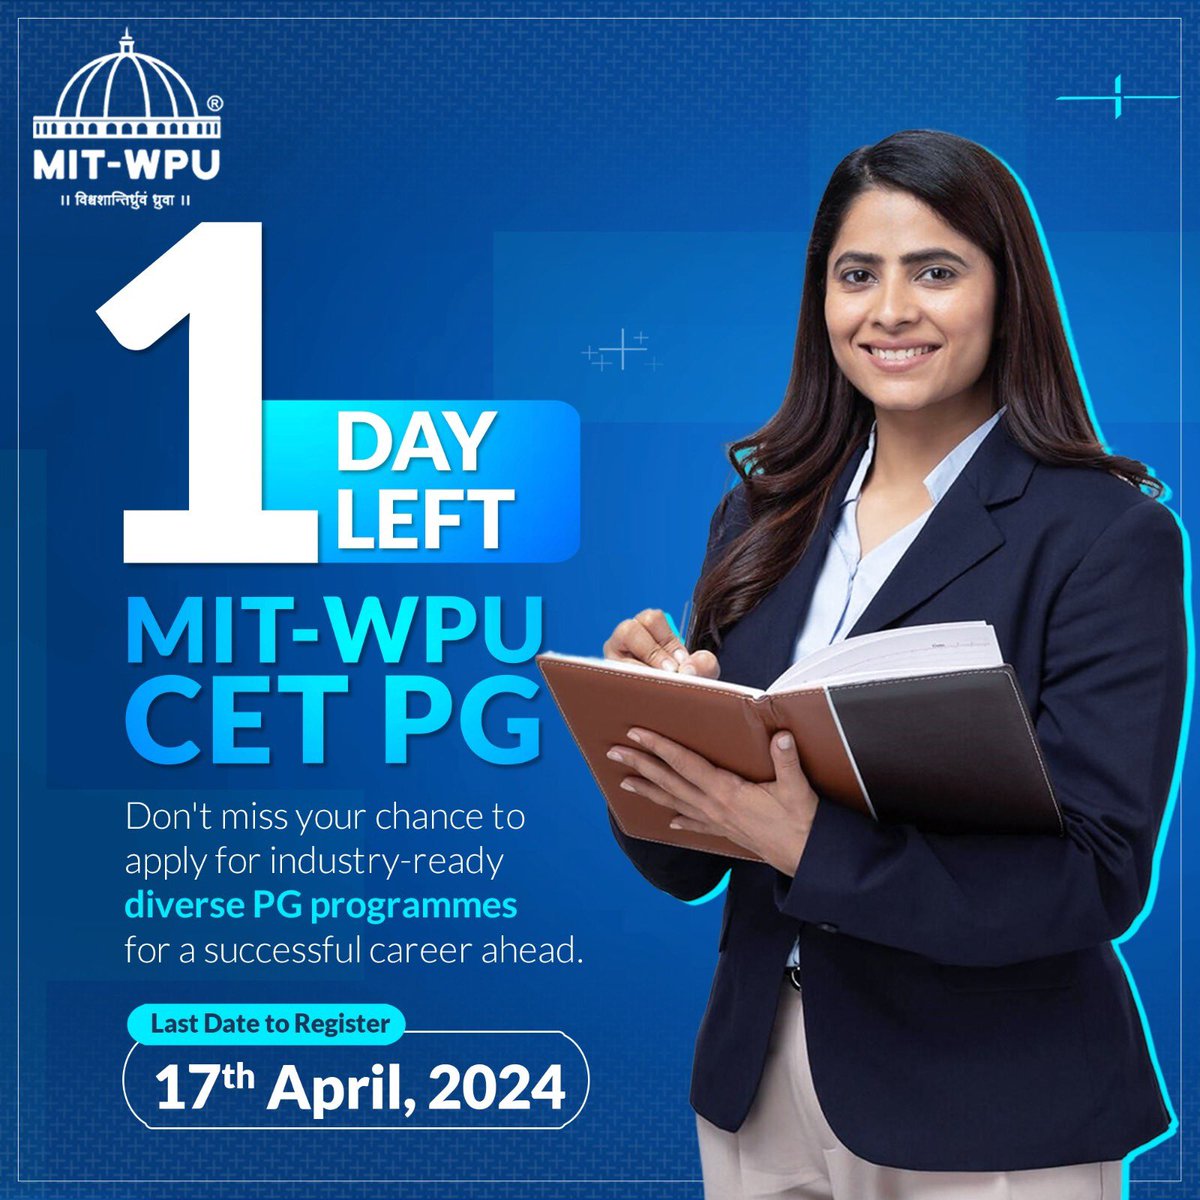 Unlock a world of opportunities with our industry-ready postgraduate programmes.
The clock is ticking ⏰, only one day left to apply!

Don't miss out on your chance to secure a successful future.

Apply NOW to explore diverse PG programs tailored for tomorrow's leaders.

#MITWPU